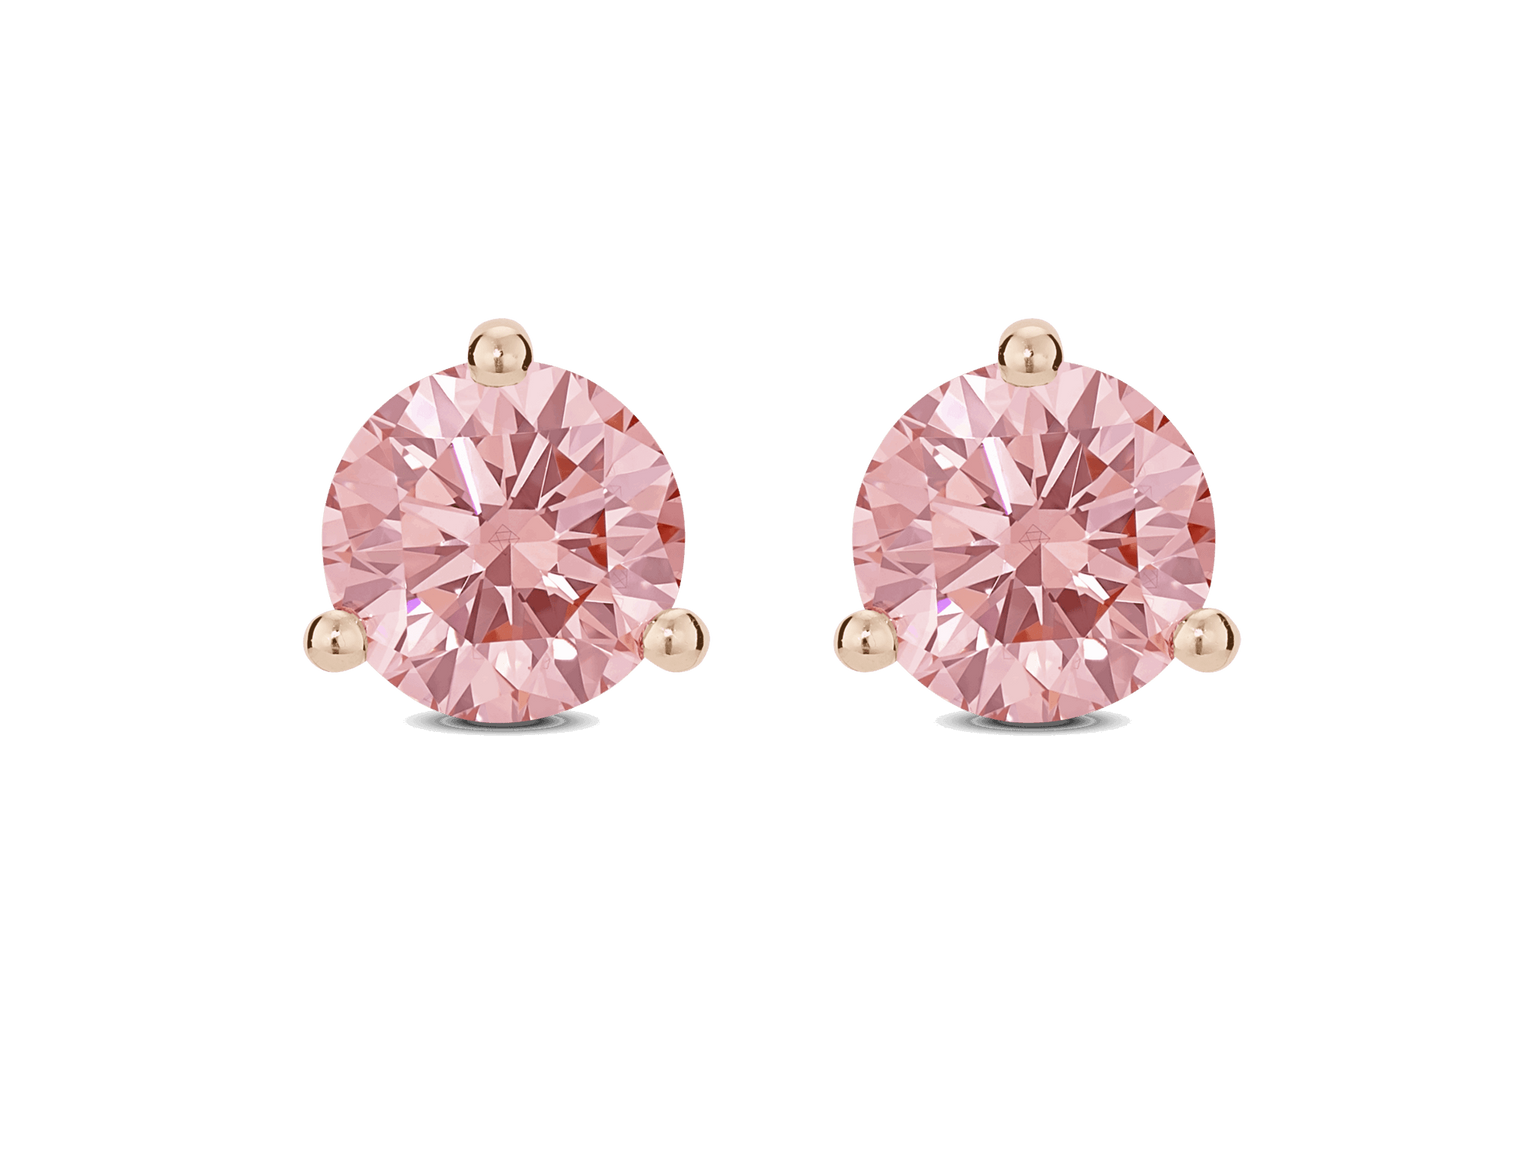 Test Copy of Lab-Grown Diamond 2ct. tw. Round Brilliant Solitaire 14k Gold Studs | Pink (Copy)